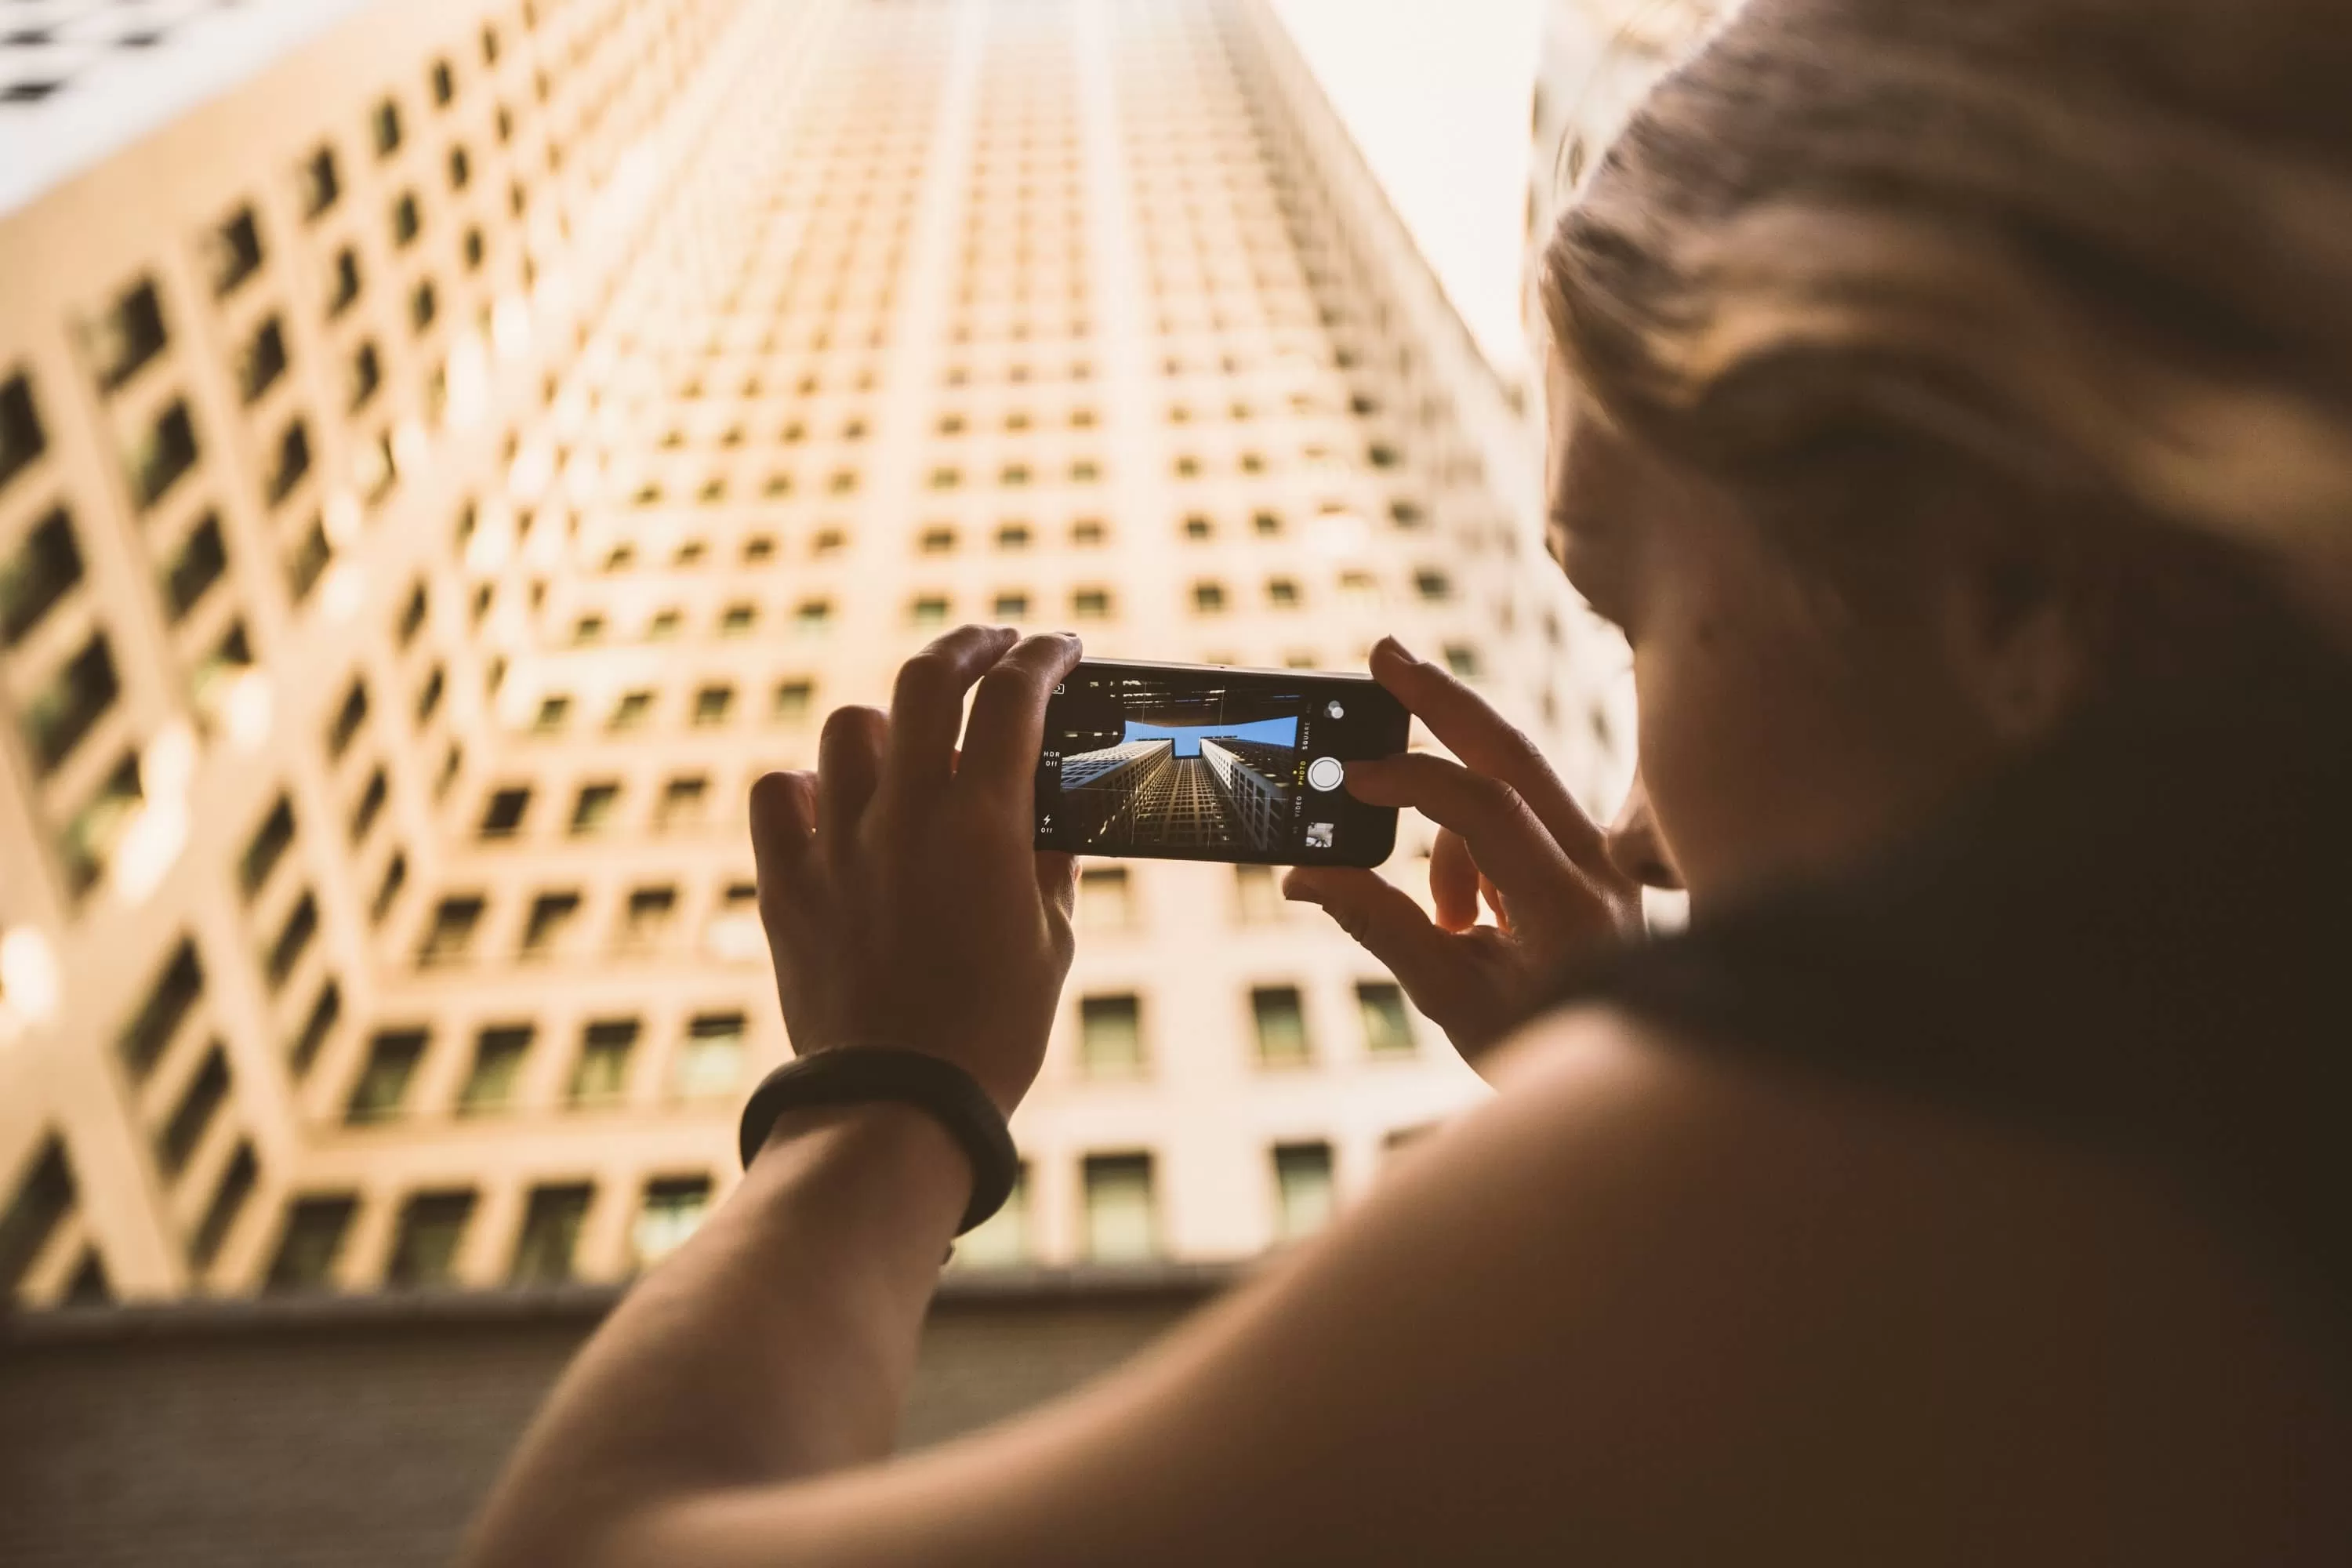 How to Manage a Travel Account on Instagram